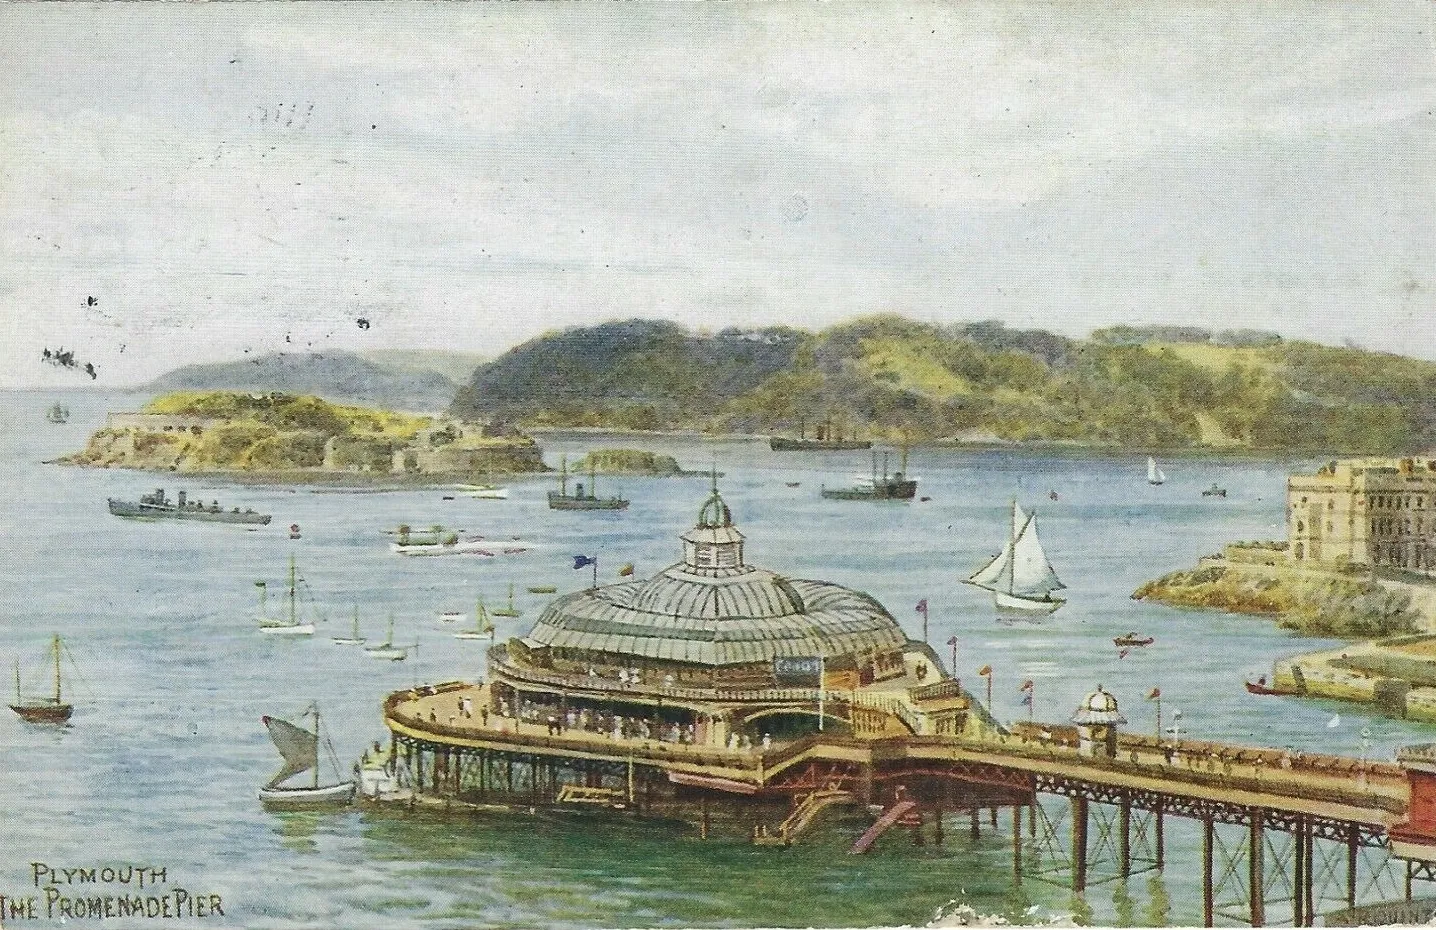 Photo showing: A. R. Quinton, “Plymouth the Promenade Pier”, water colour printed as postcard